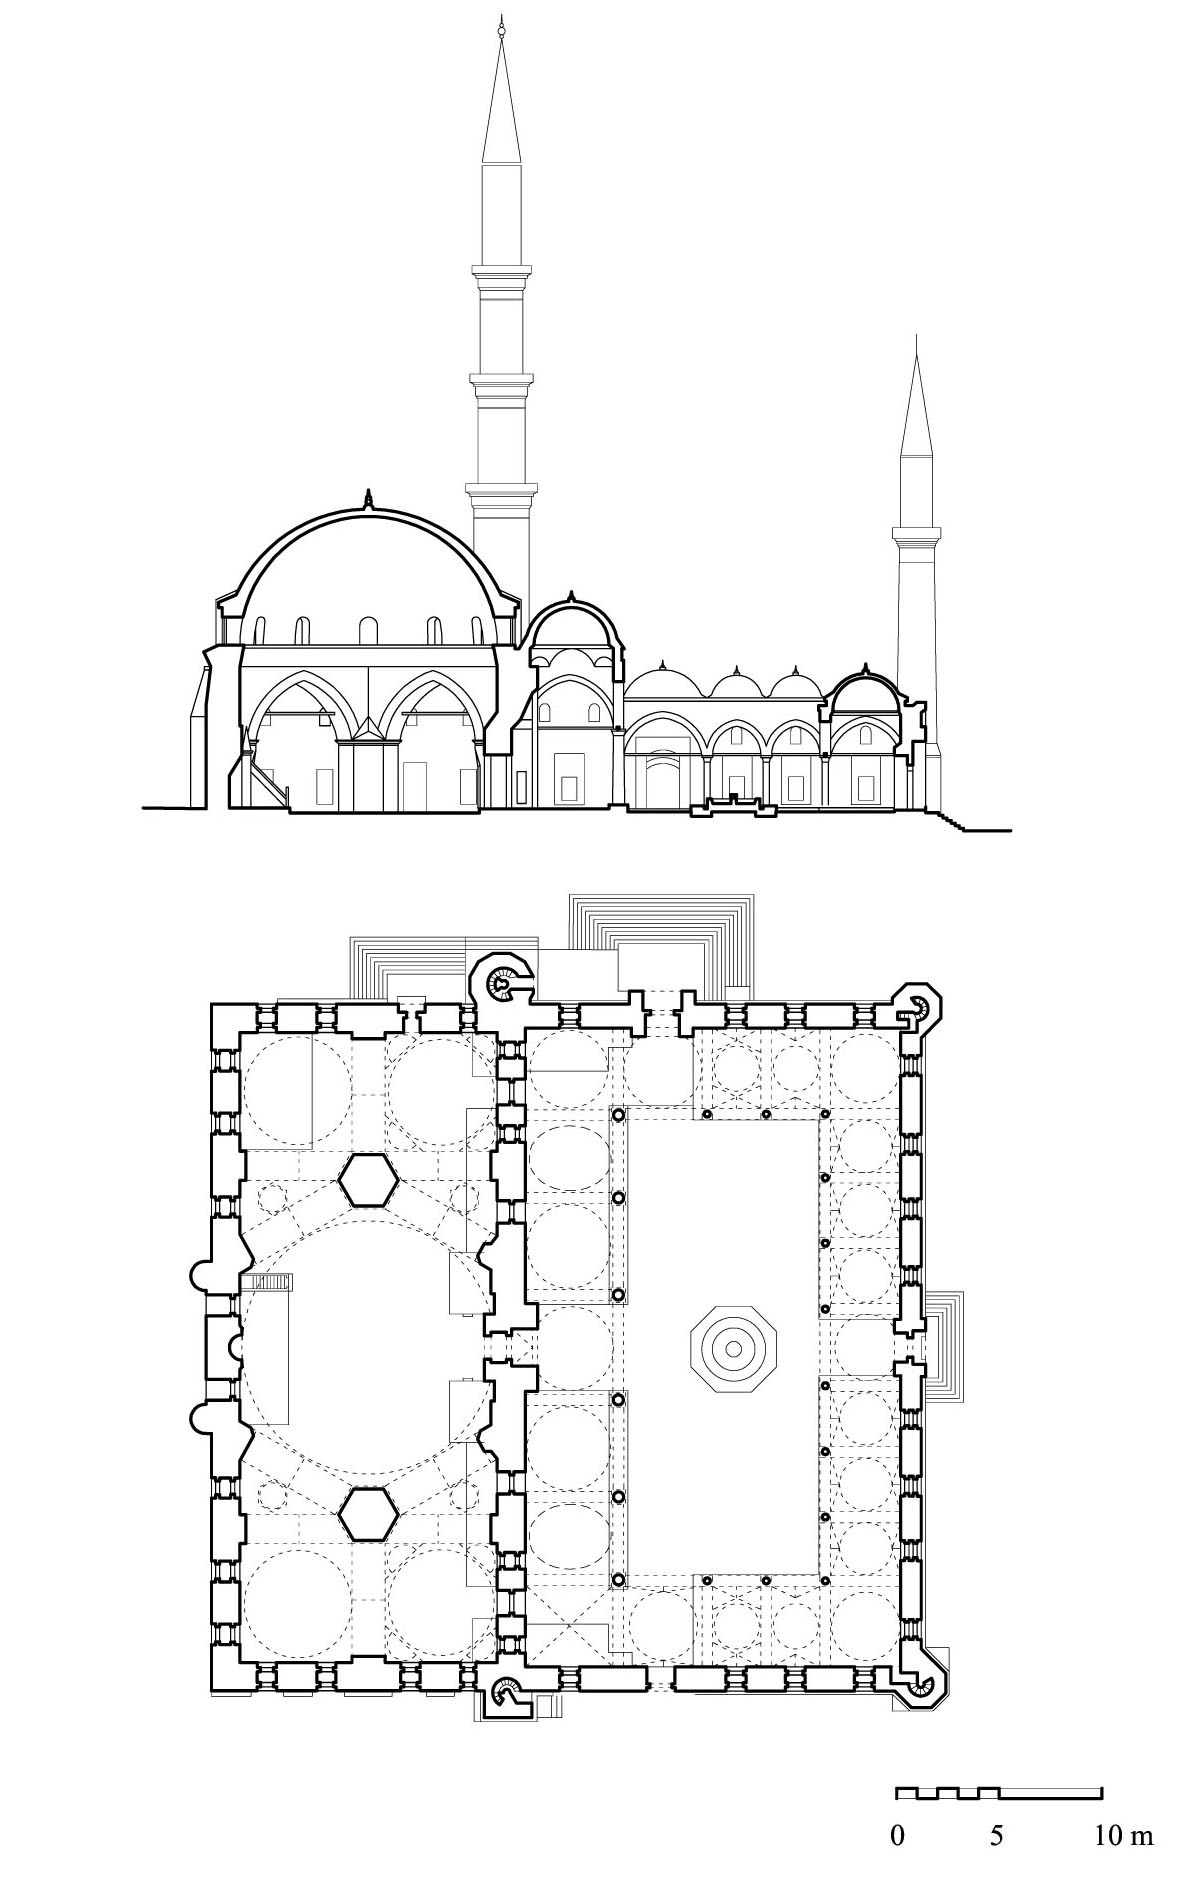 Floor plan and cross-section